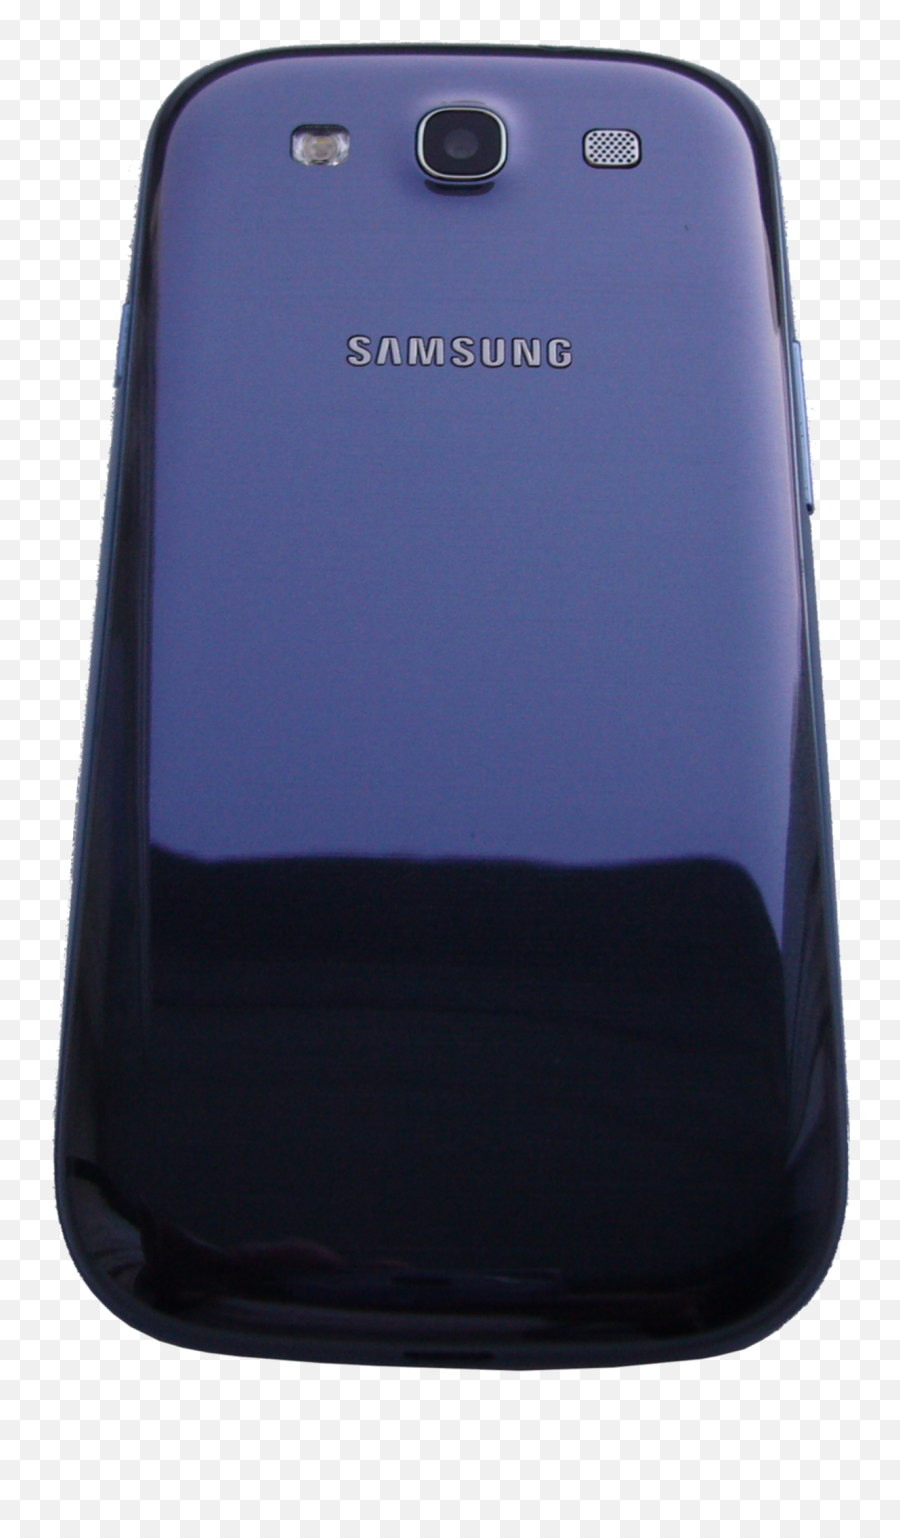 Samsung Galaxy S Iii Pebble Blue - Phone Back And Tilted Emoji,How Do You Change The Emoticons On Galaxy S3